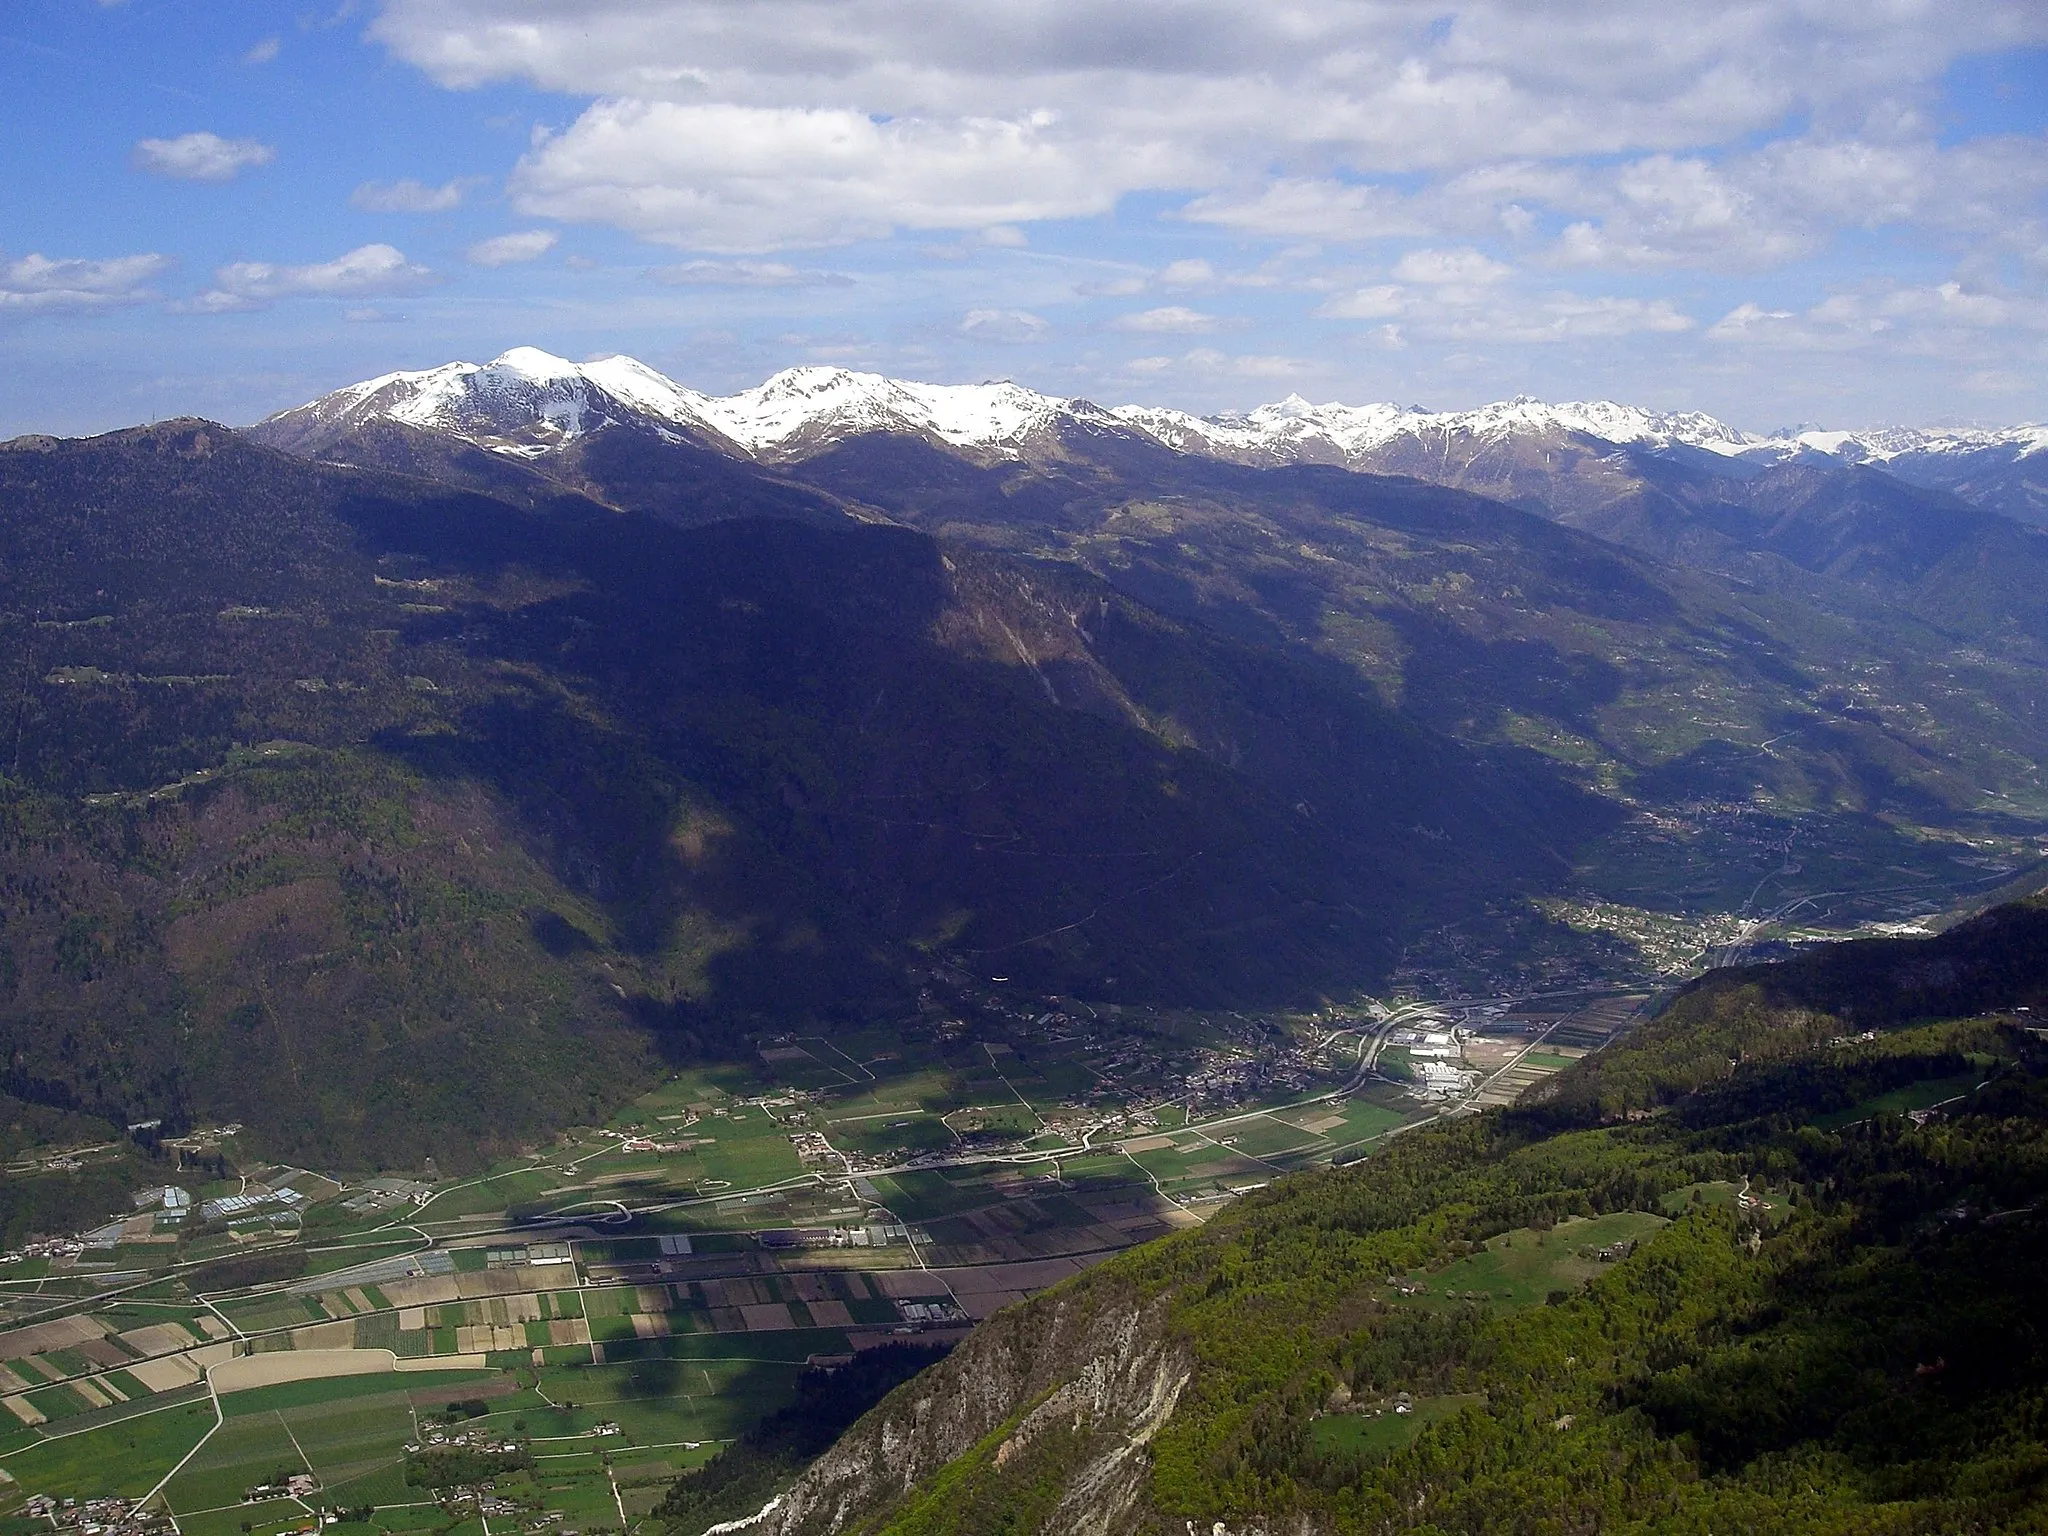 Photo showing: The Marter village (in the municipality of Roncegno Terme, Trentino, Italy) and the municipality of Novaledo (Trentino, Italy) viewed from Cima Vezzena (Pizzo di Levico).